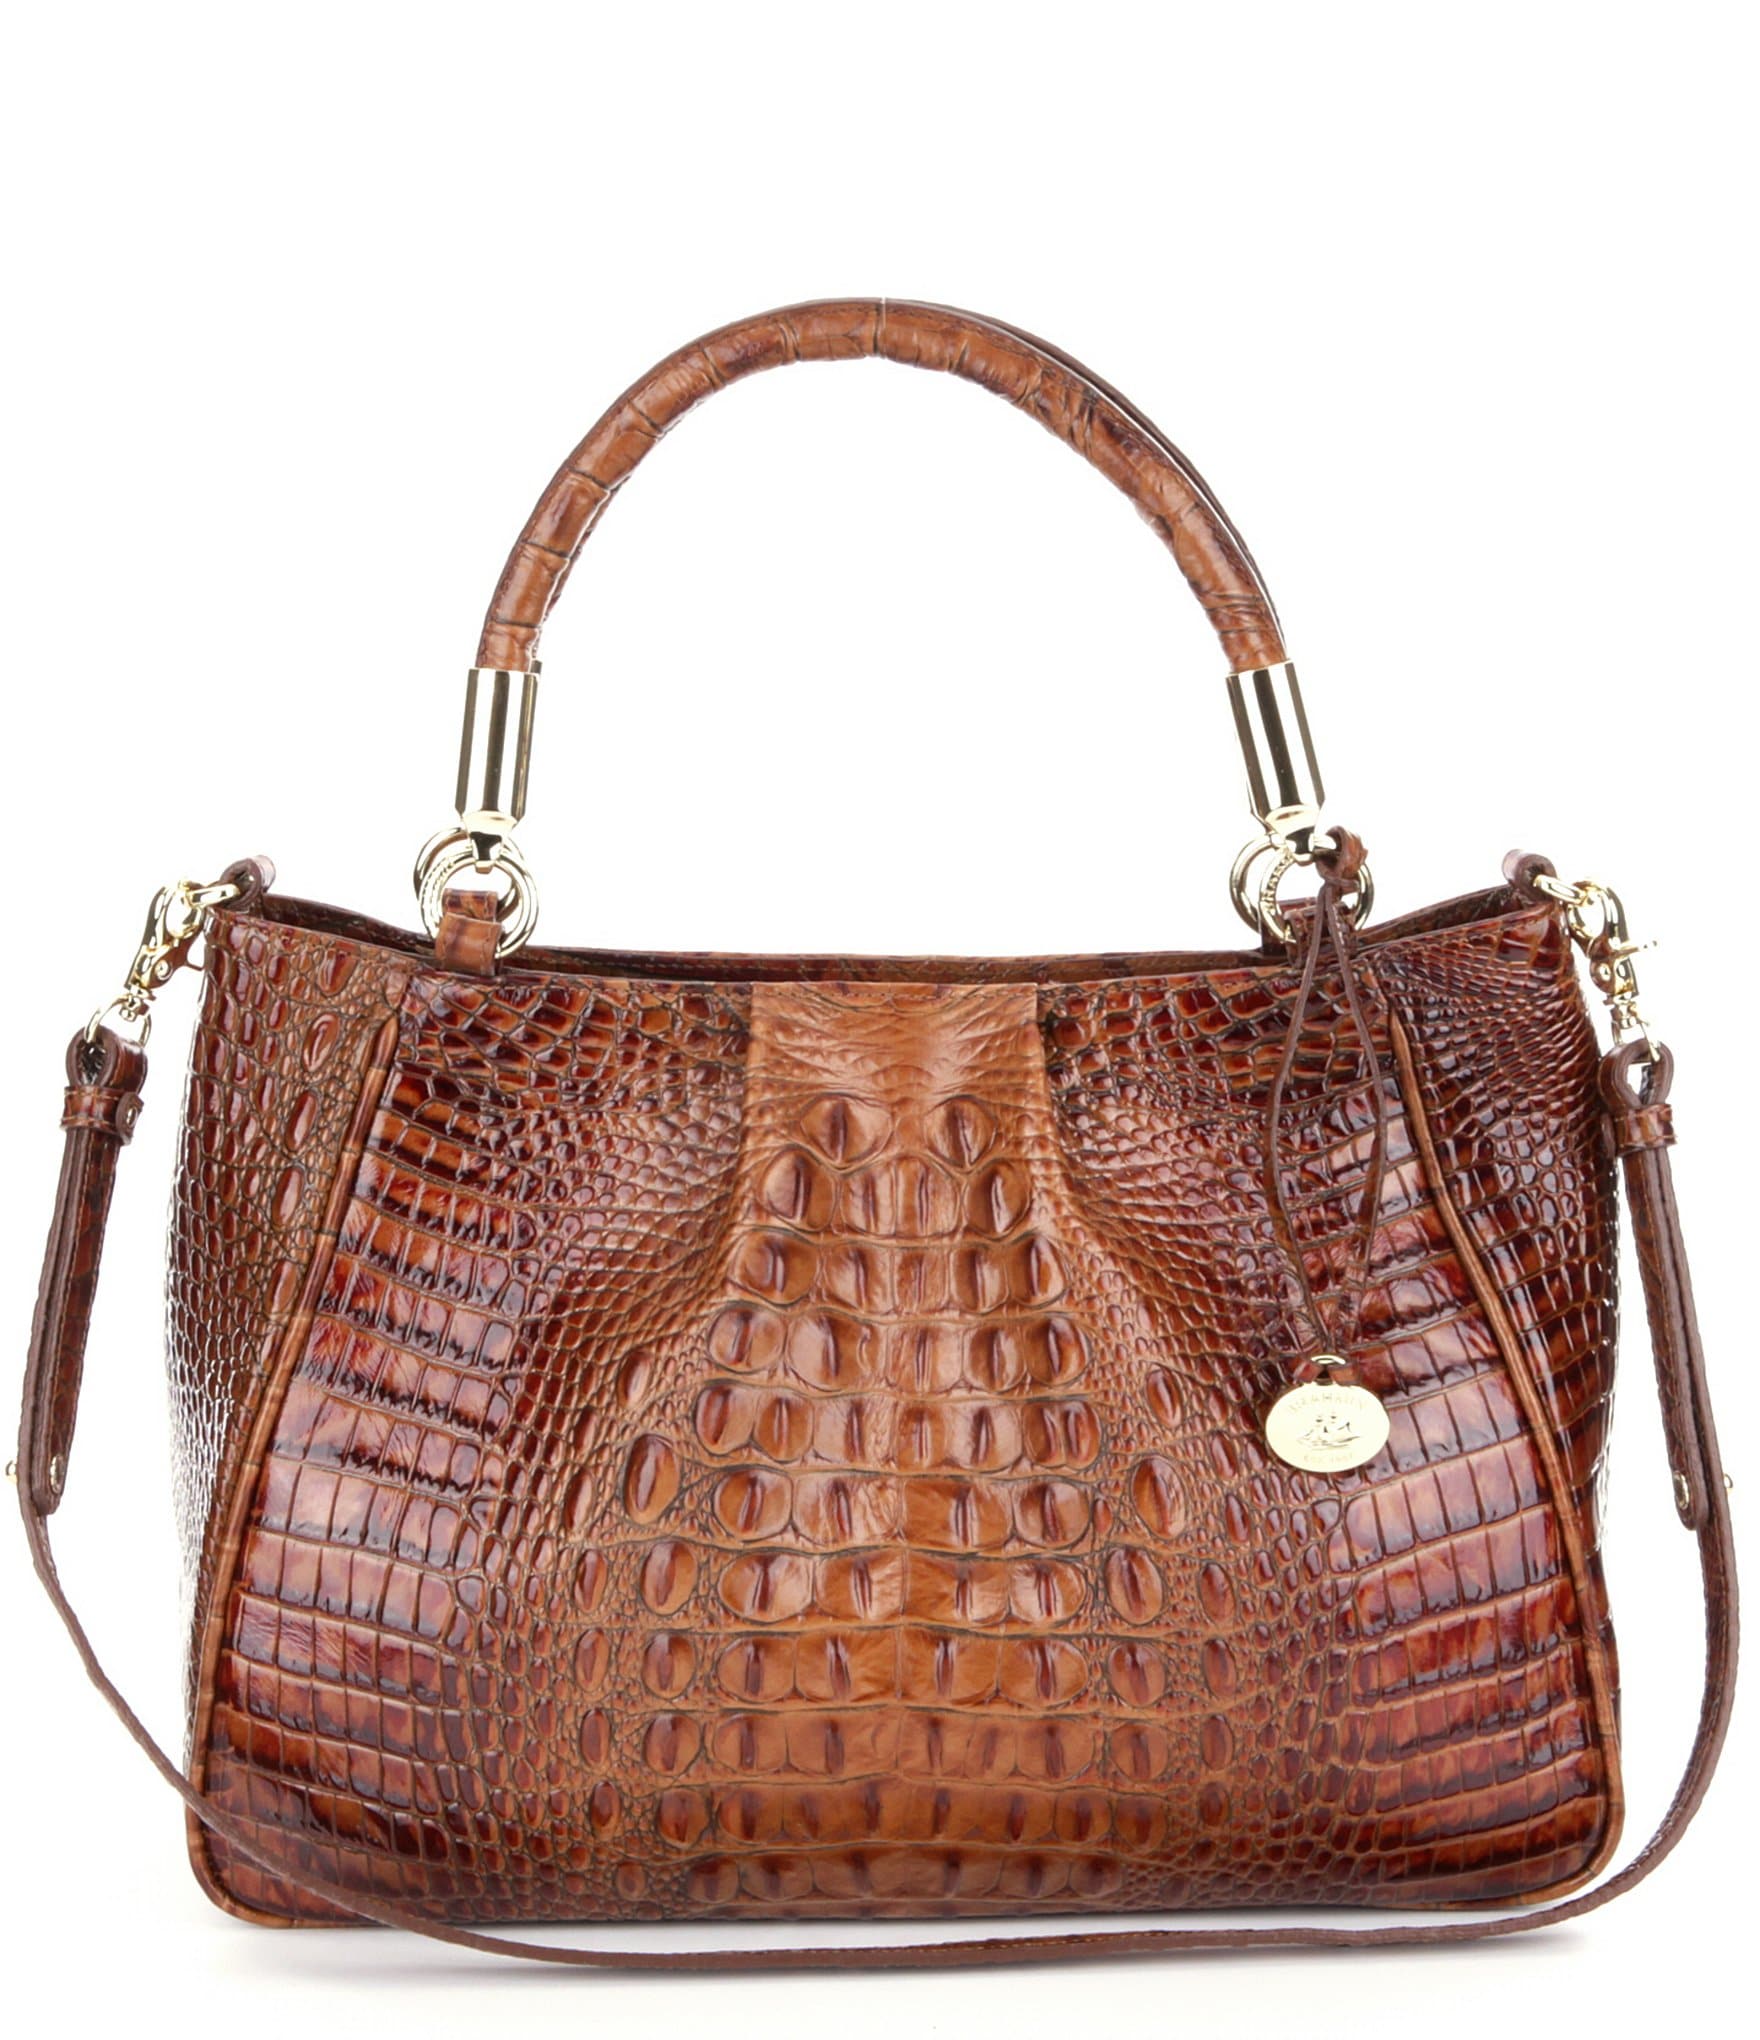 Coach Purses On Clearance At Dillards | Confederated Tribes of the Umatilla Indian Reservation